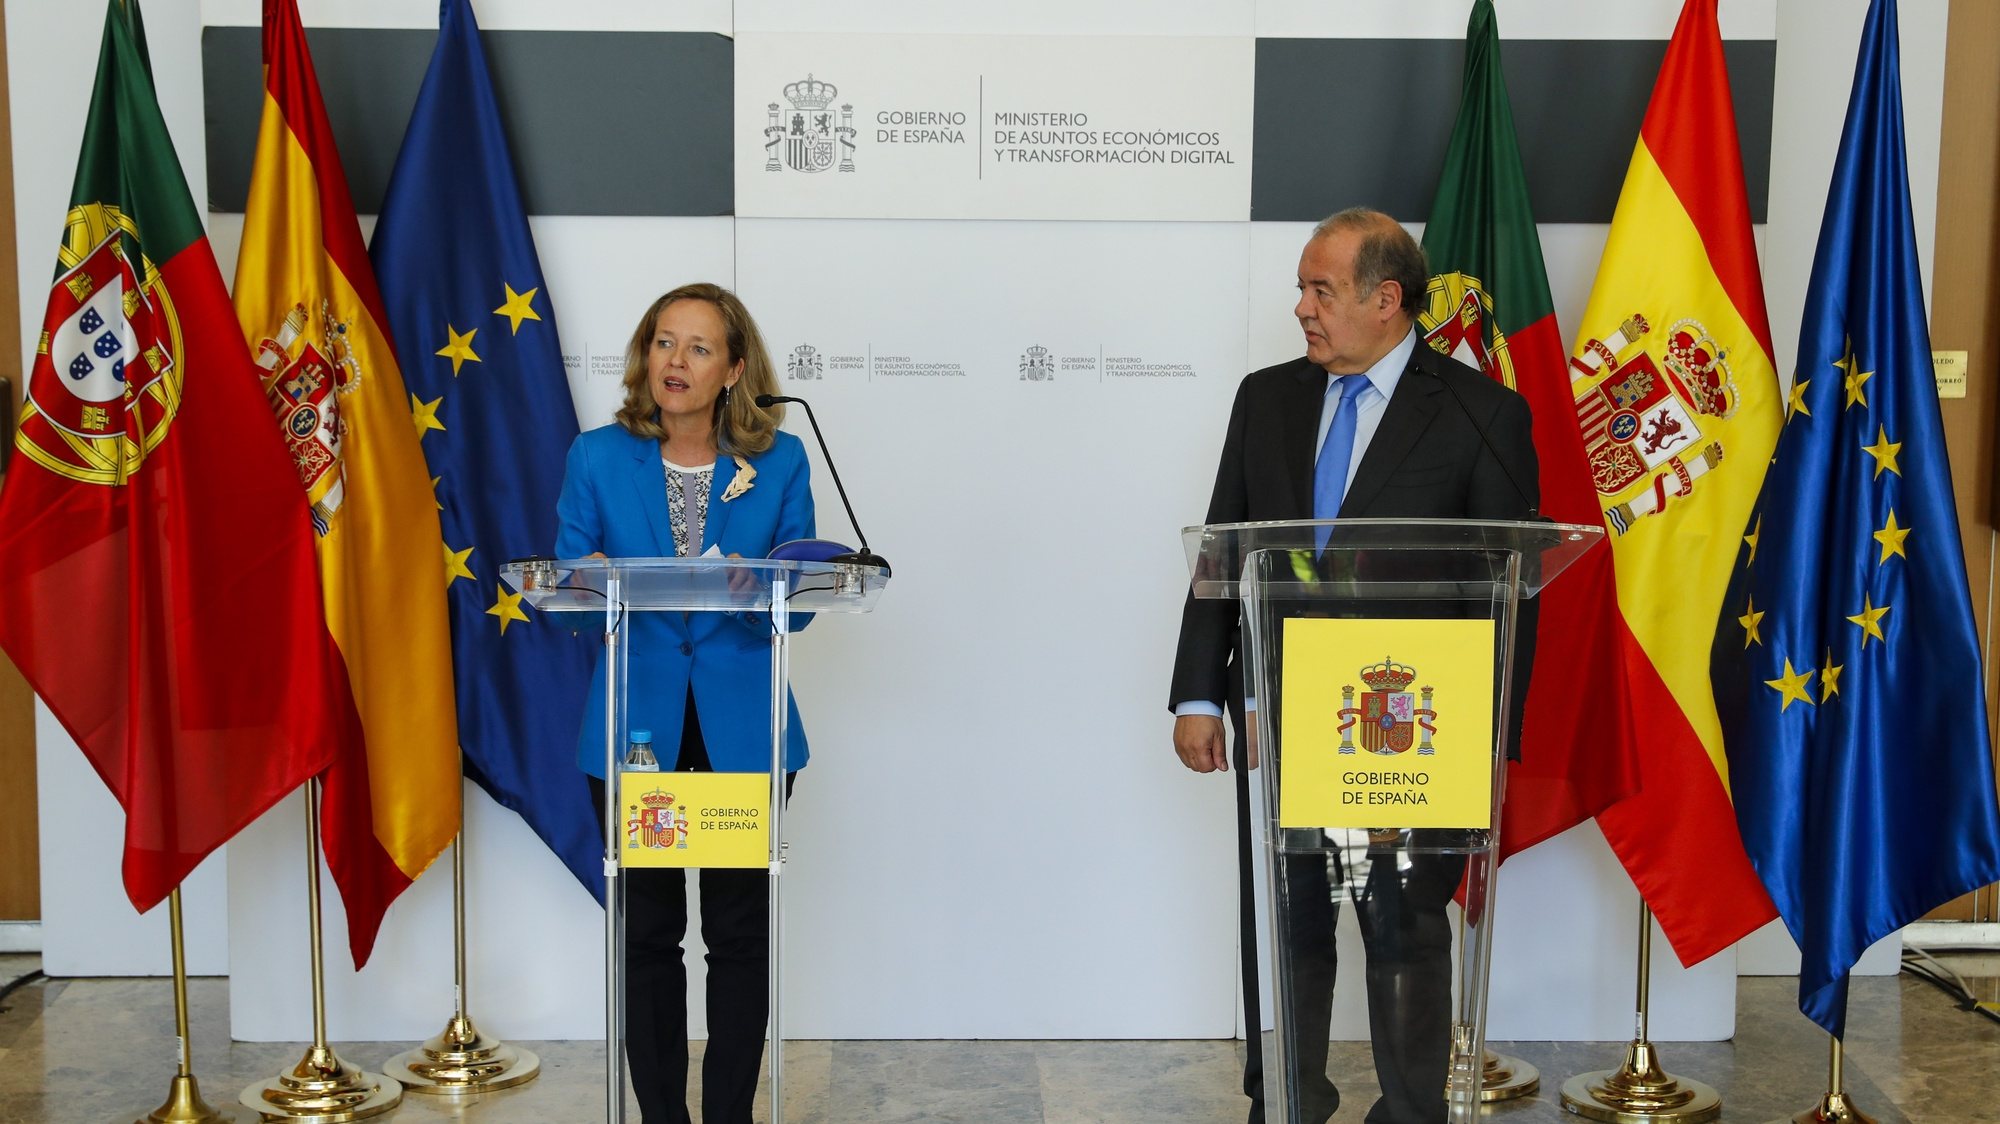 epa10195106 Spanish Minister of Economy, Nadia Calvino (L), and her Portuguese counterpart, Antonio Costa Silva, address a joint press conference after their meeting in Madrid, Spain, 20 September 2022.  EPA/Luis Millan